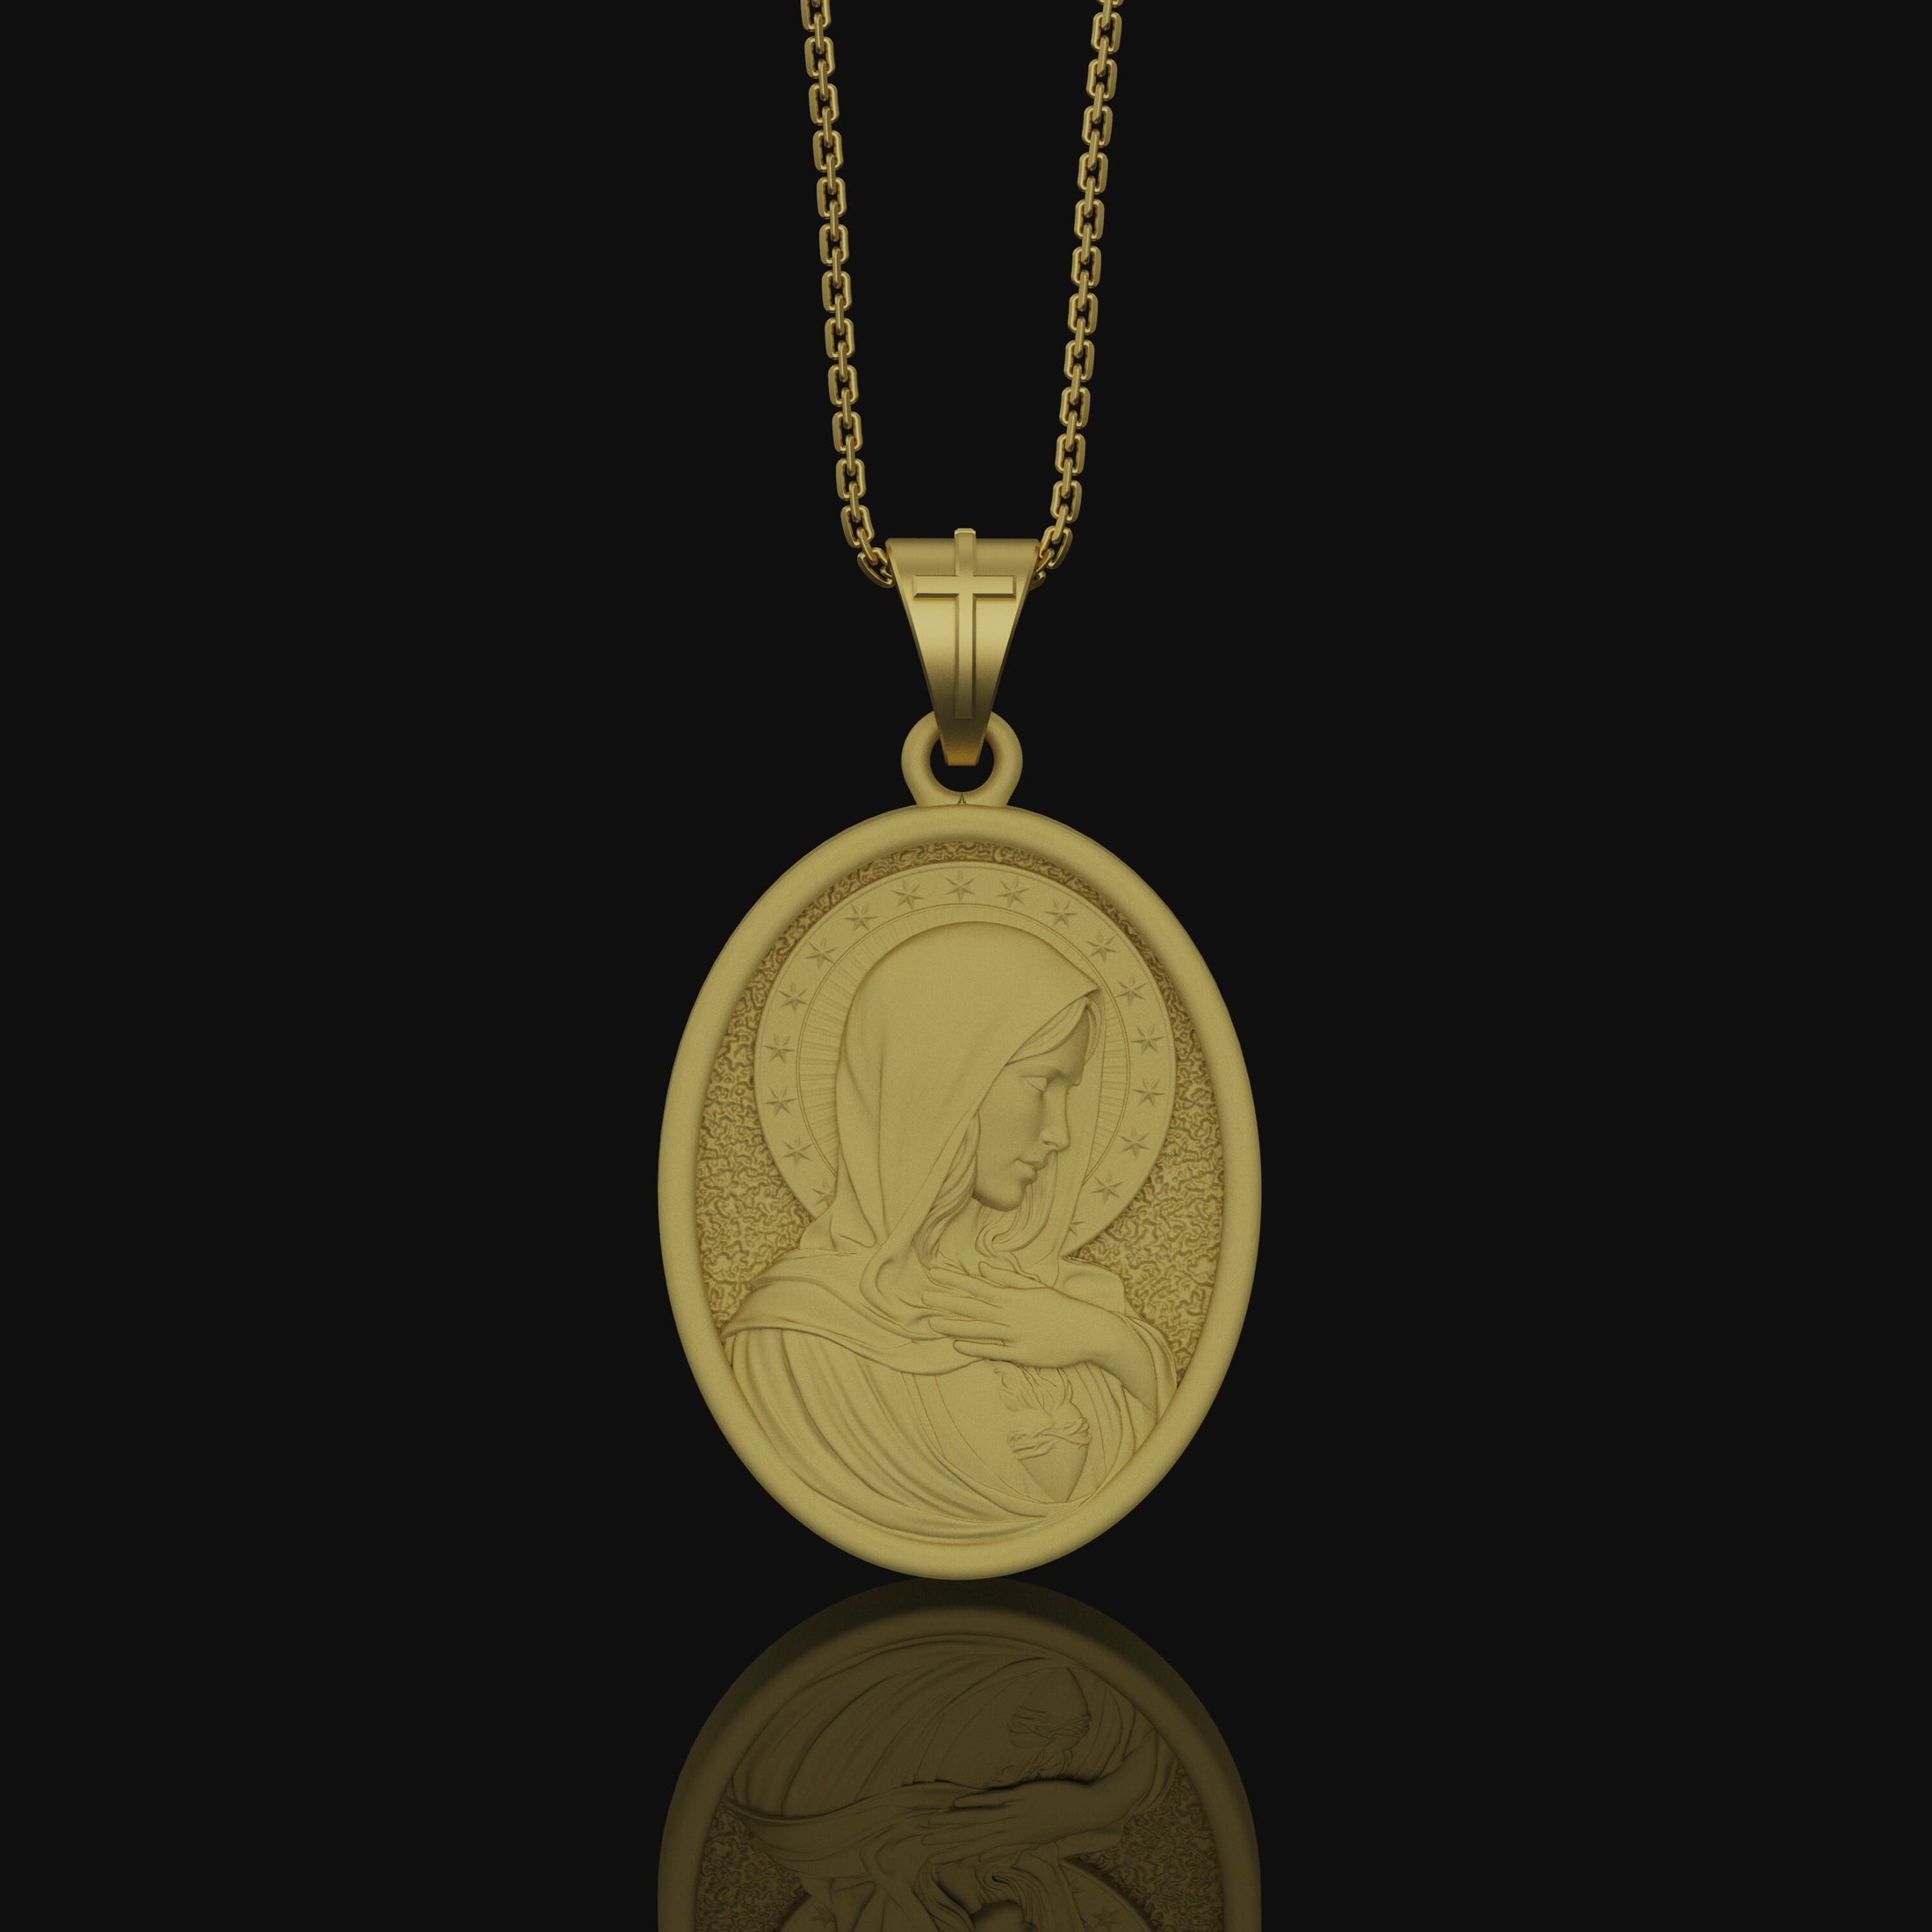 Immaculate Heart, Virgin Mary, Mother Of Jesus, Religious Jewelry, Sacred Heart Medal, Miraculous Medal, Religious Pendant Gold Matte